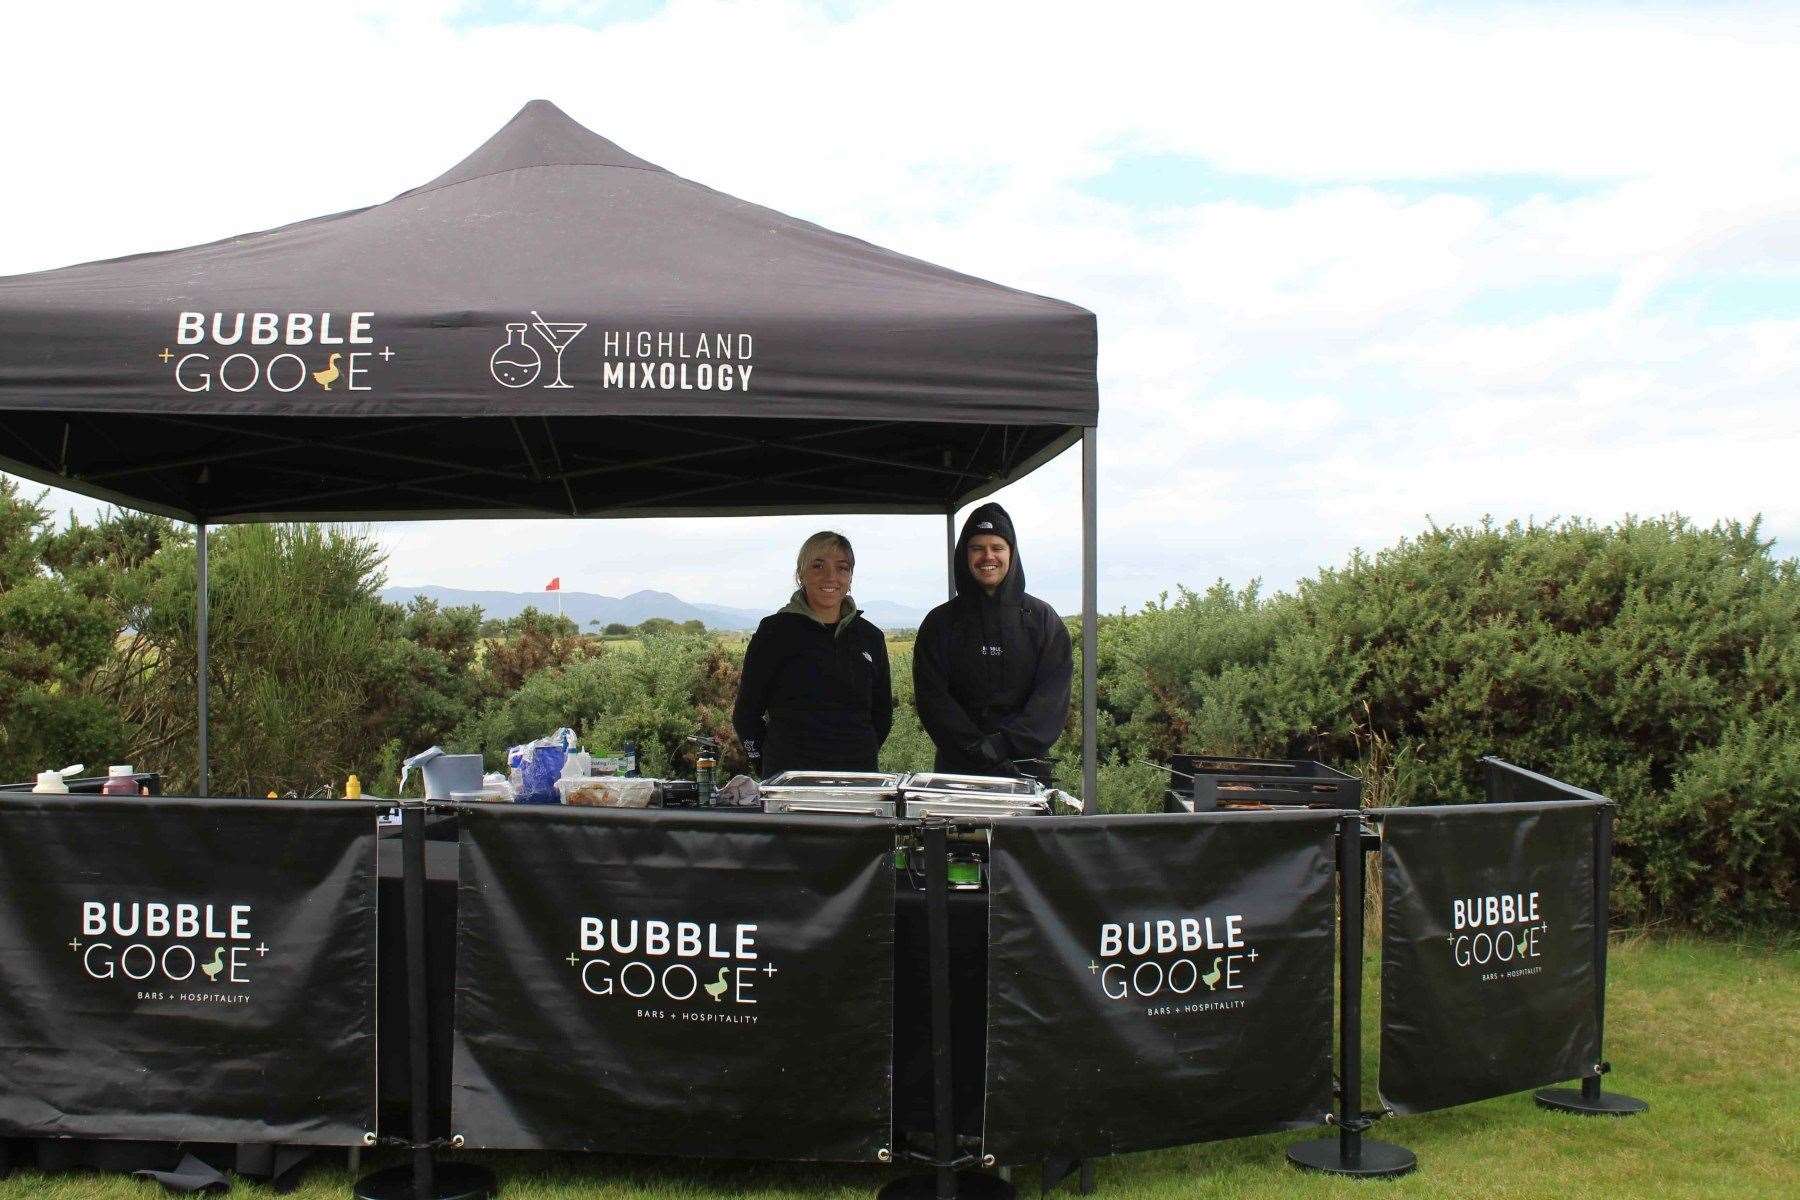 Bubble & Goose provided the catering.